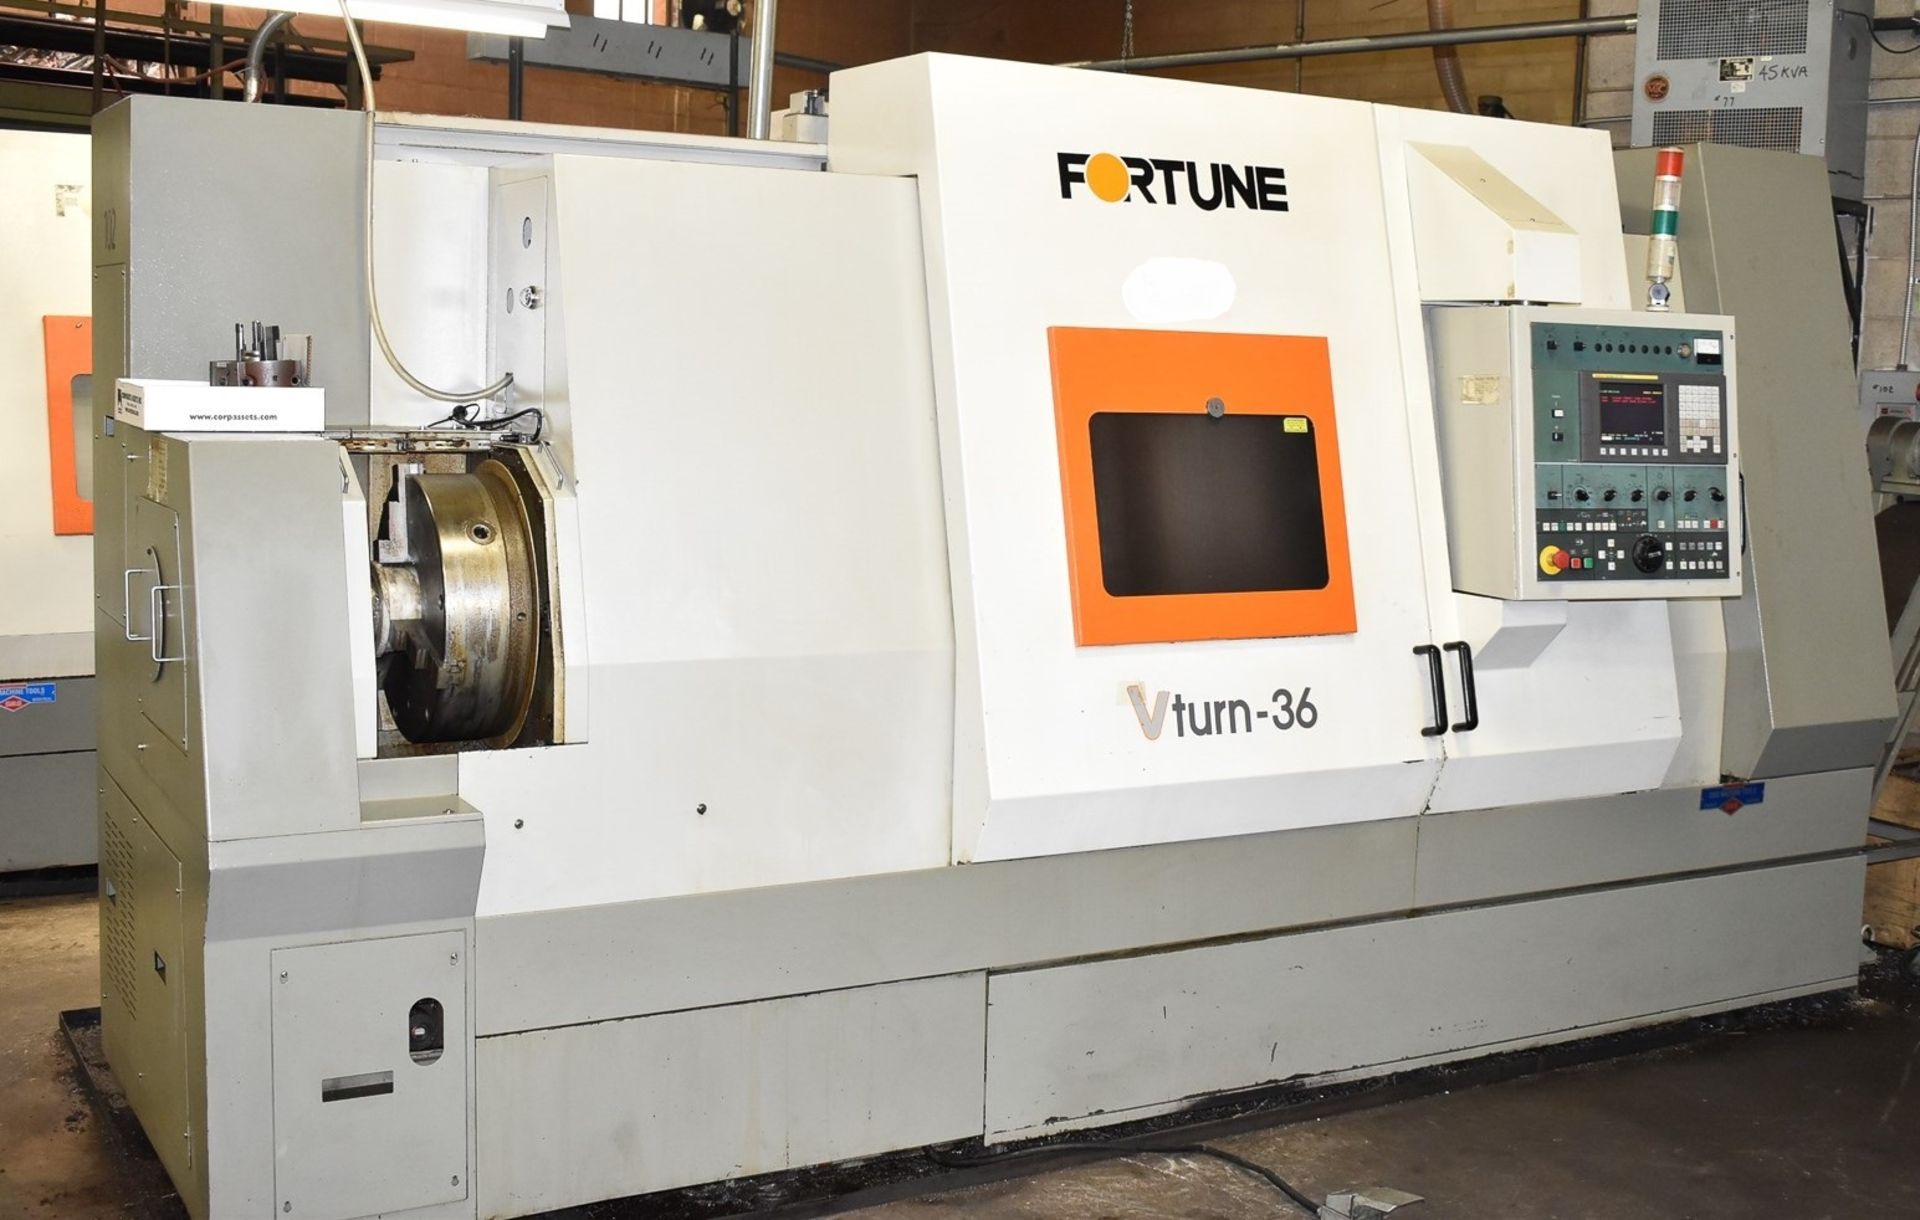 21.65"x35" Victor (Fortune) Model VTurn-36 2-Axis CNC Turning Center Lathe, S/N MD-1636, New 2007